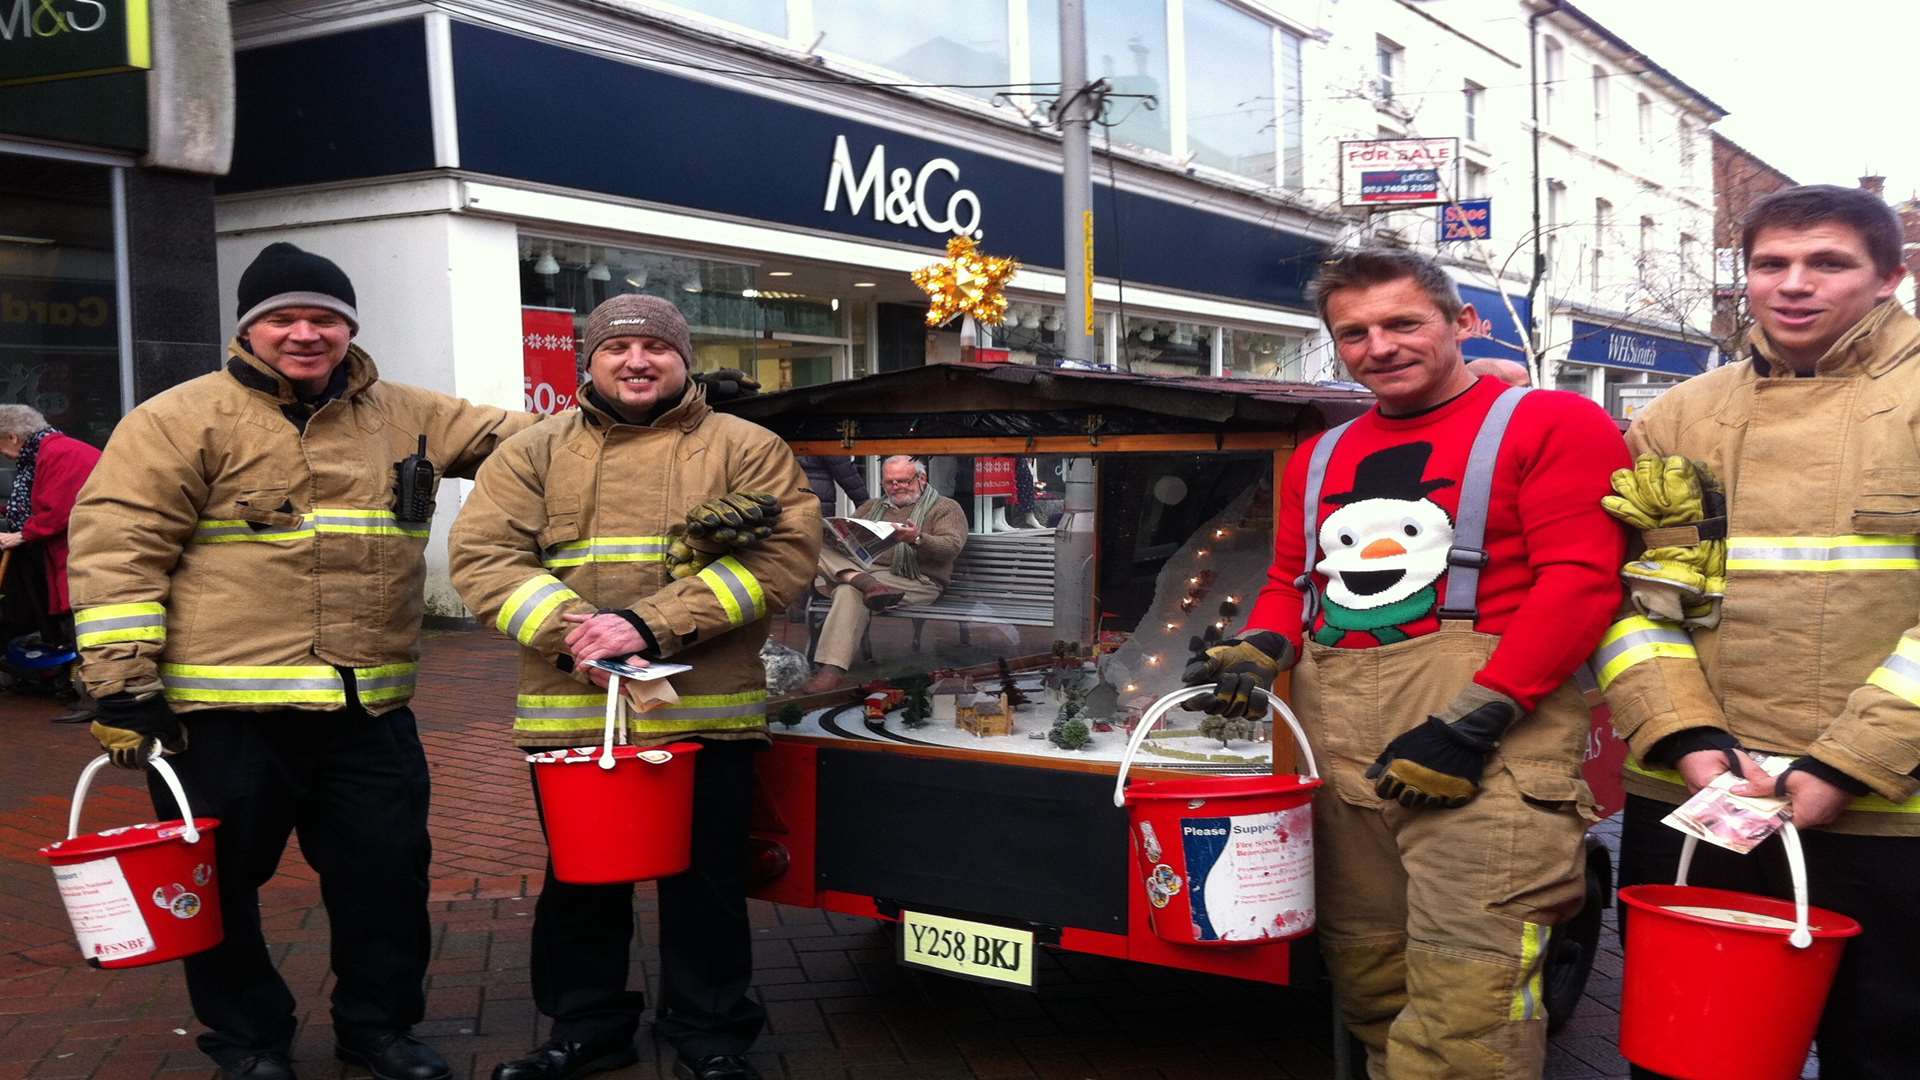 Firefighters Bob Bale, Craig Sheridan, Rob Taylor and Sam Hursey collecting outside Marks & Spencer in Deal High Street